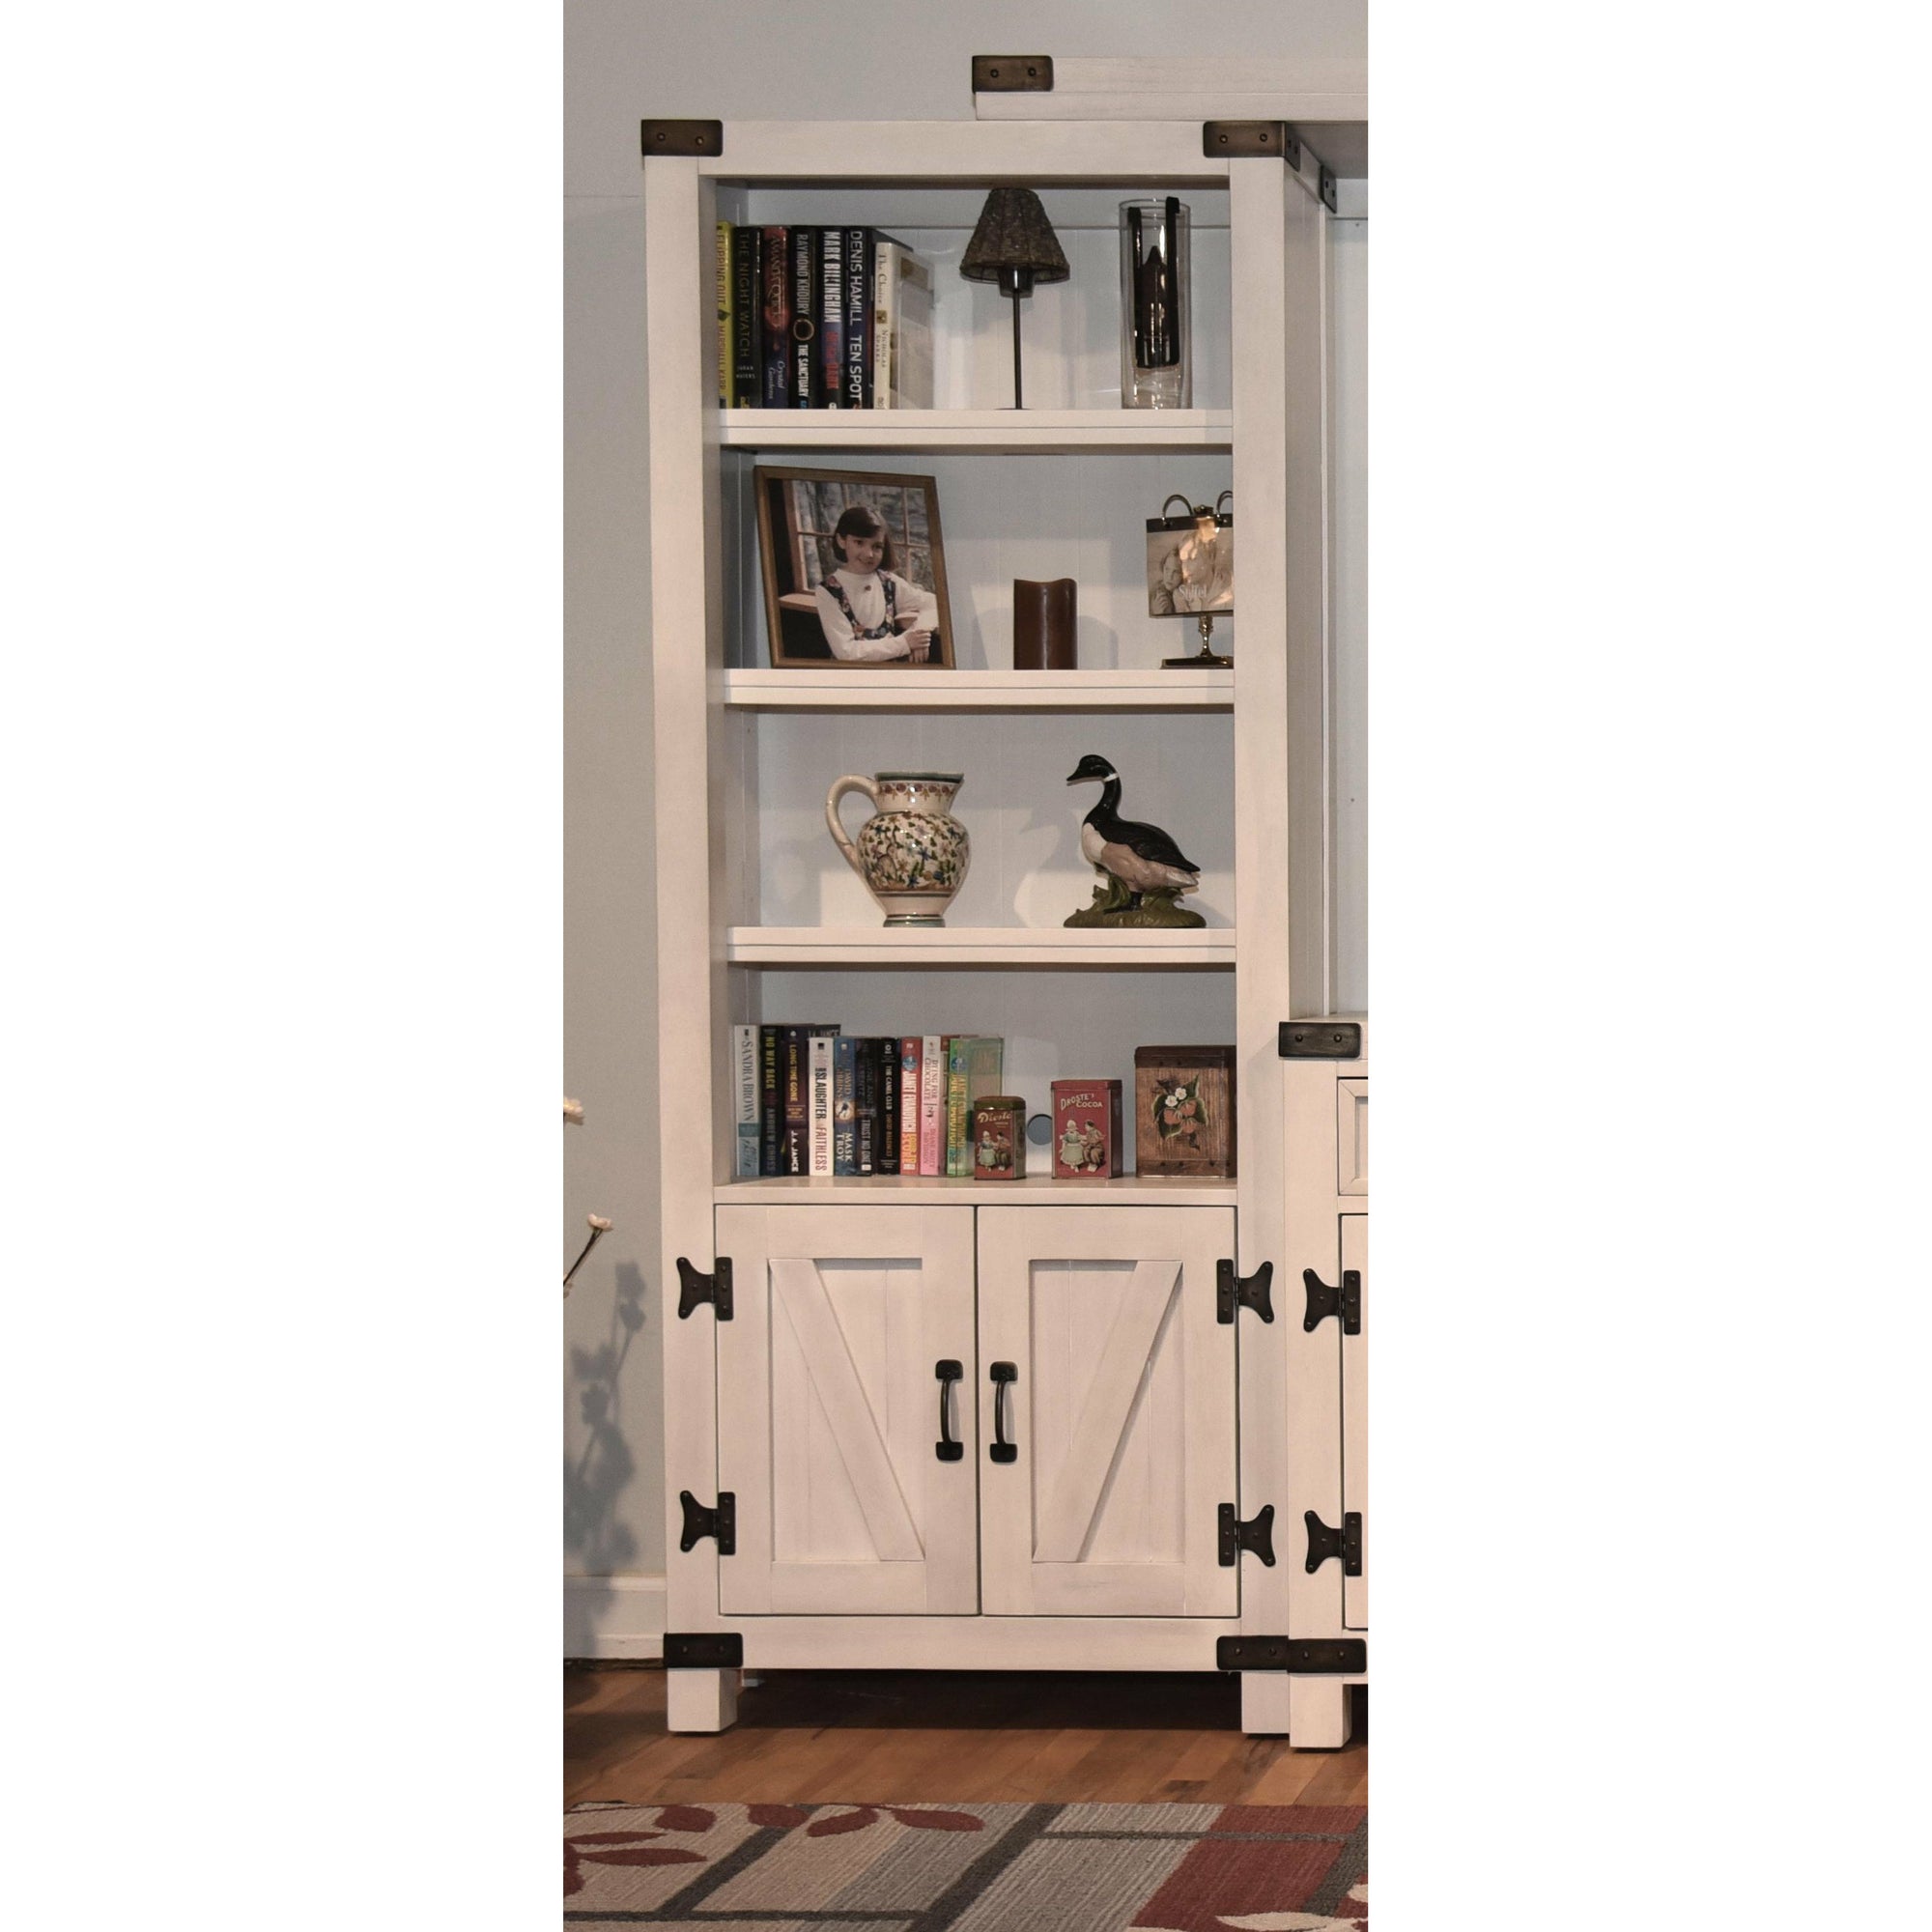 Country Lane Bookcase